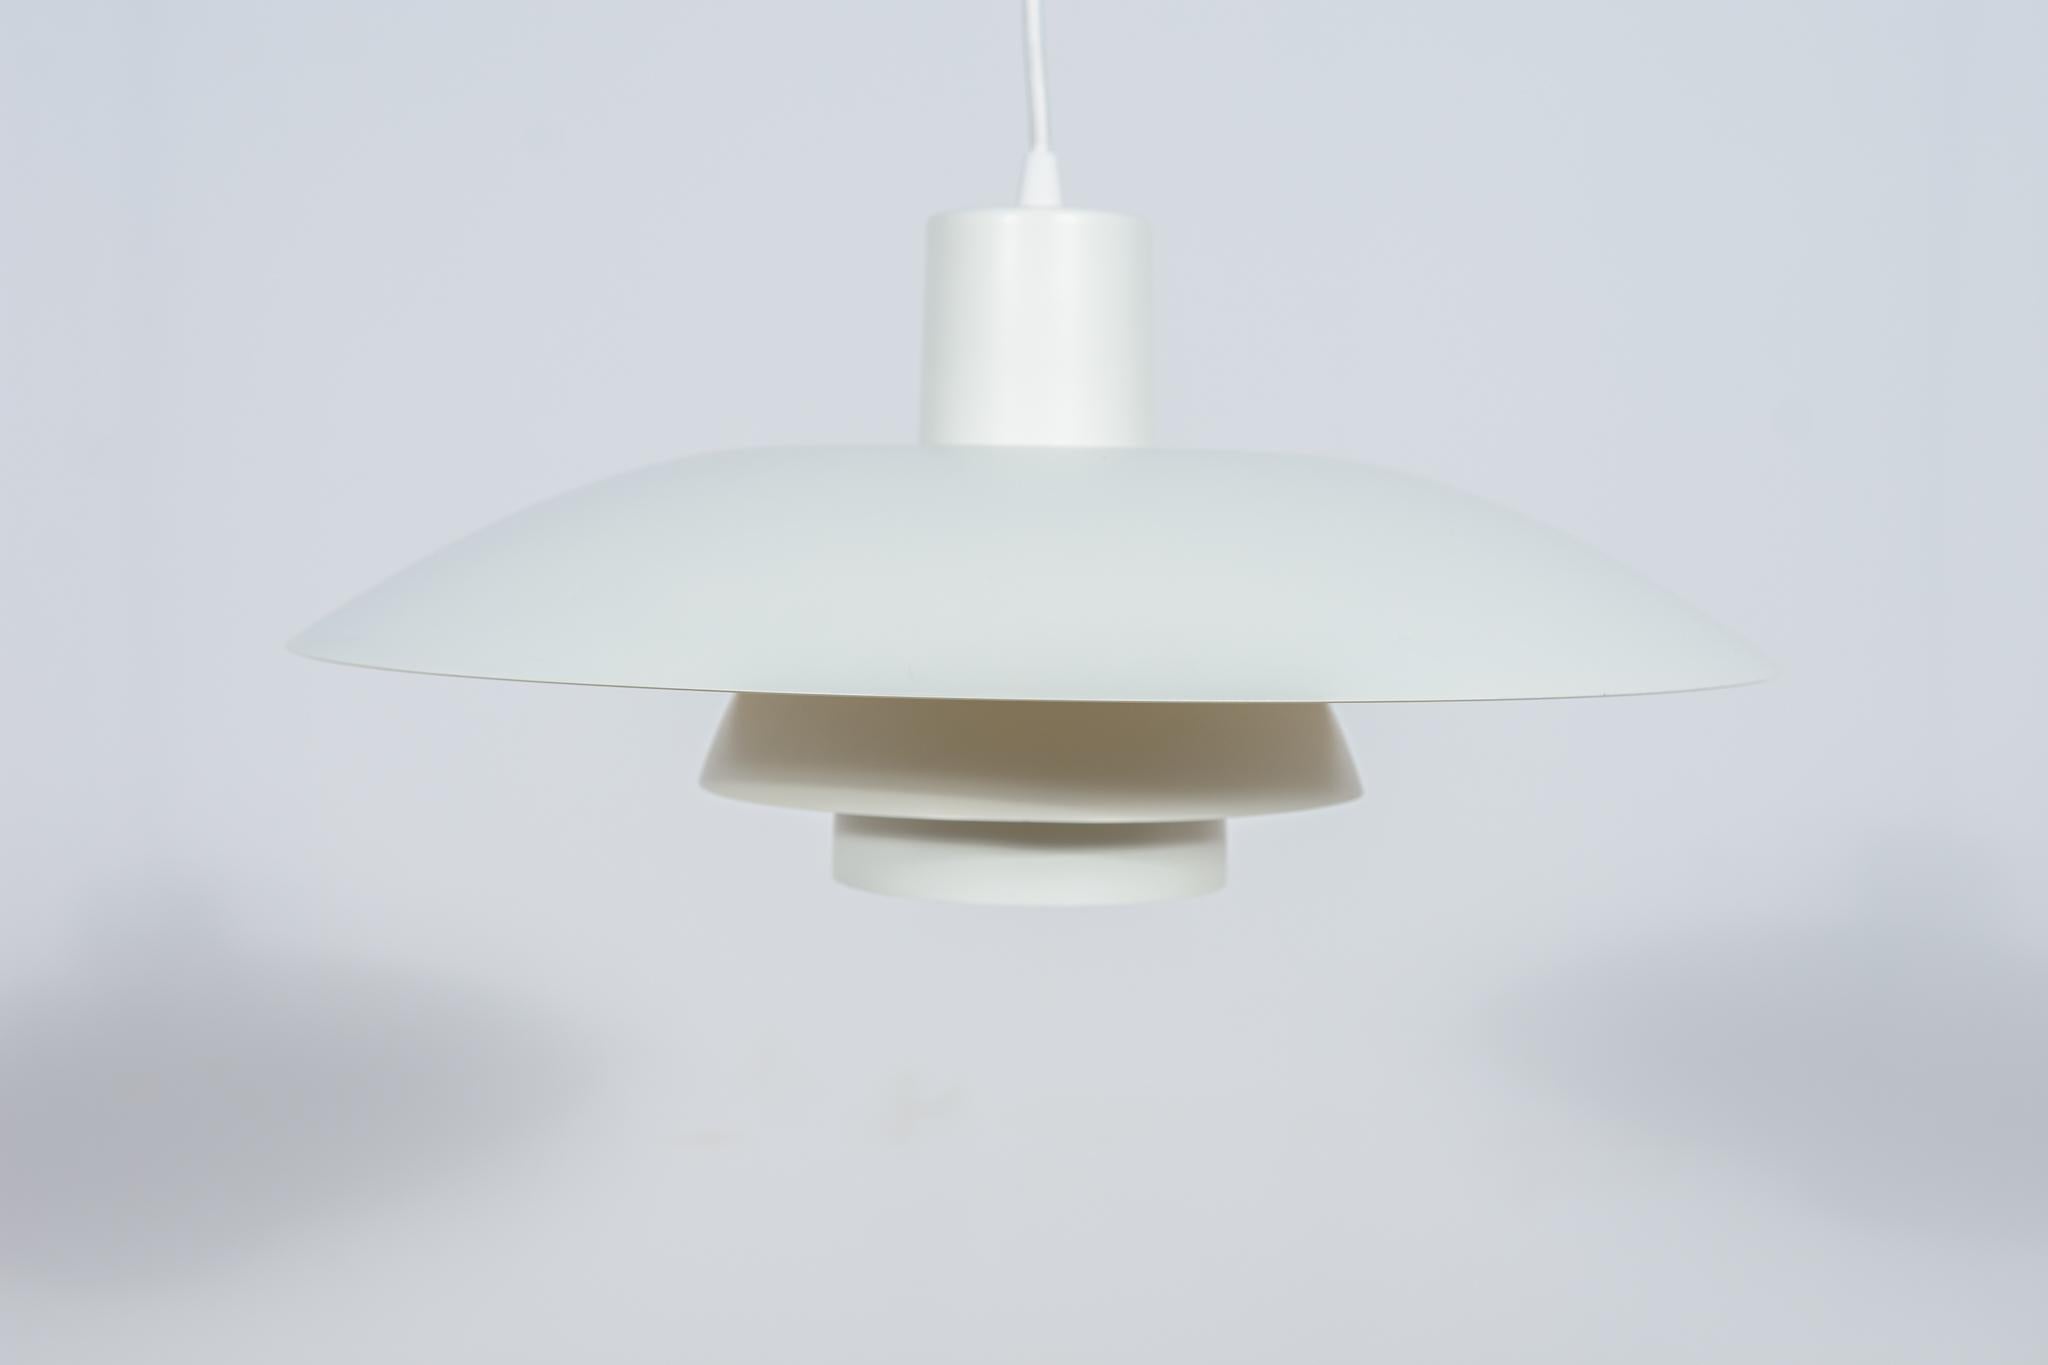 This pendant was designed by Poul Henningsen and produced by Louis Poulsen from 1966 until it was discontinued in this color in the late 1970s to early 1980s. It is made of powder-coated aluminum and is lit both downwards and from the sides. The PH